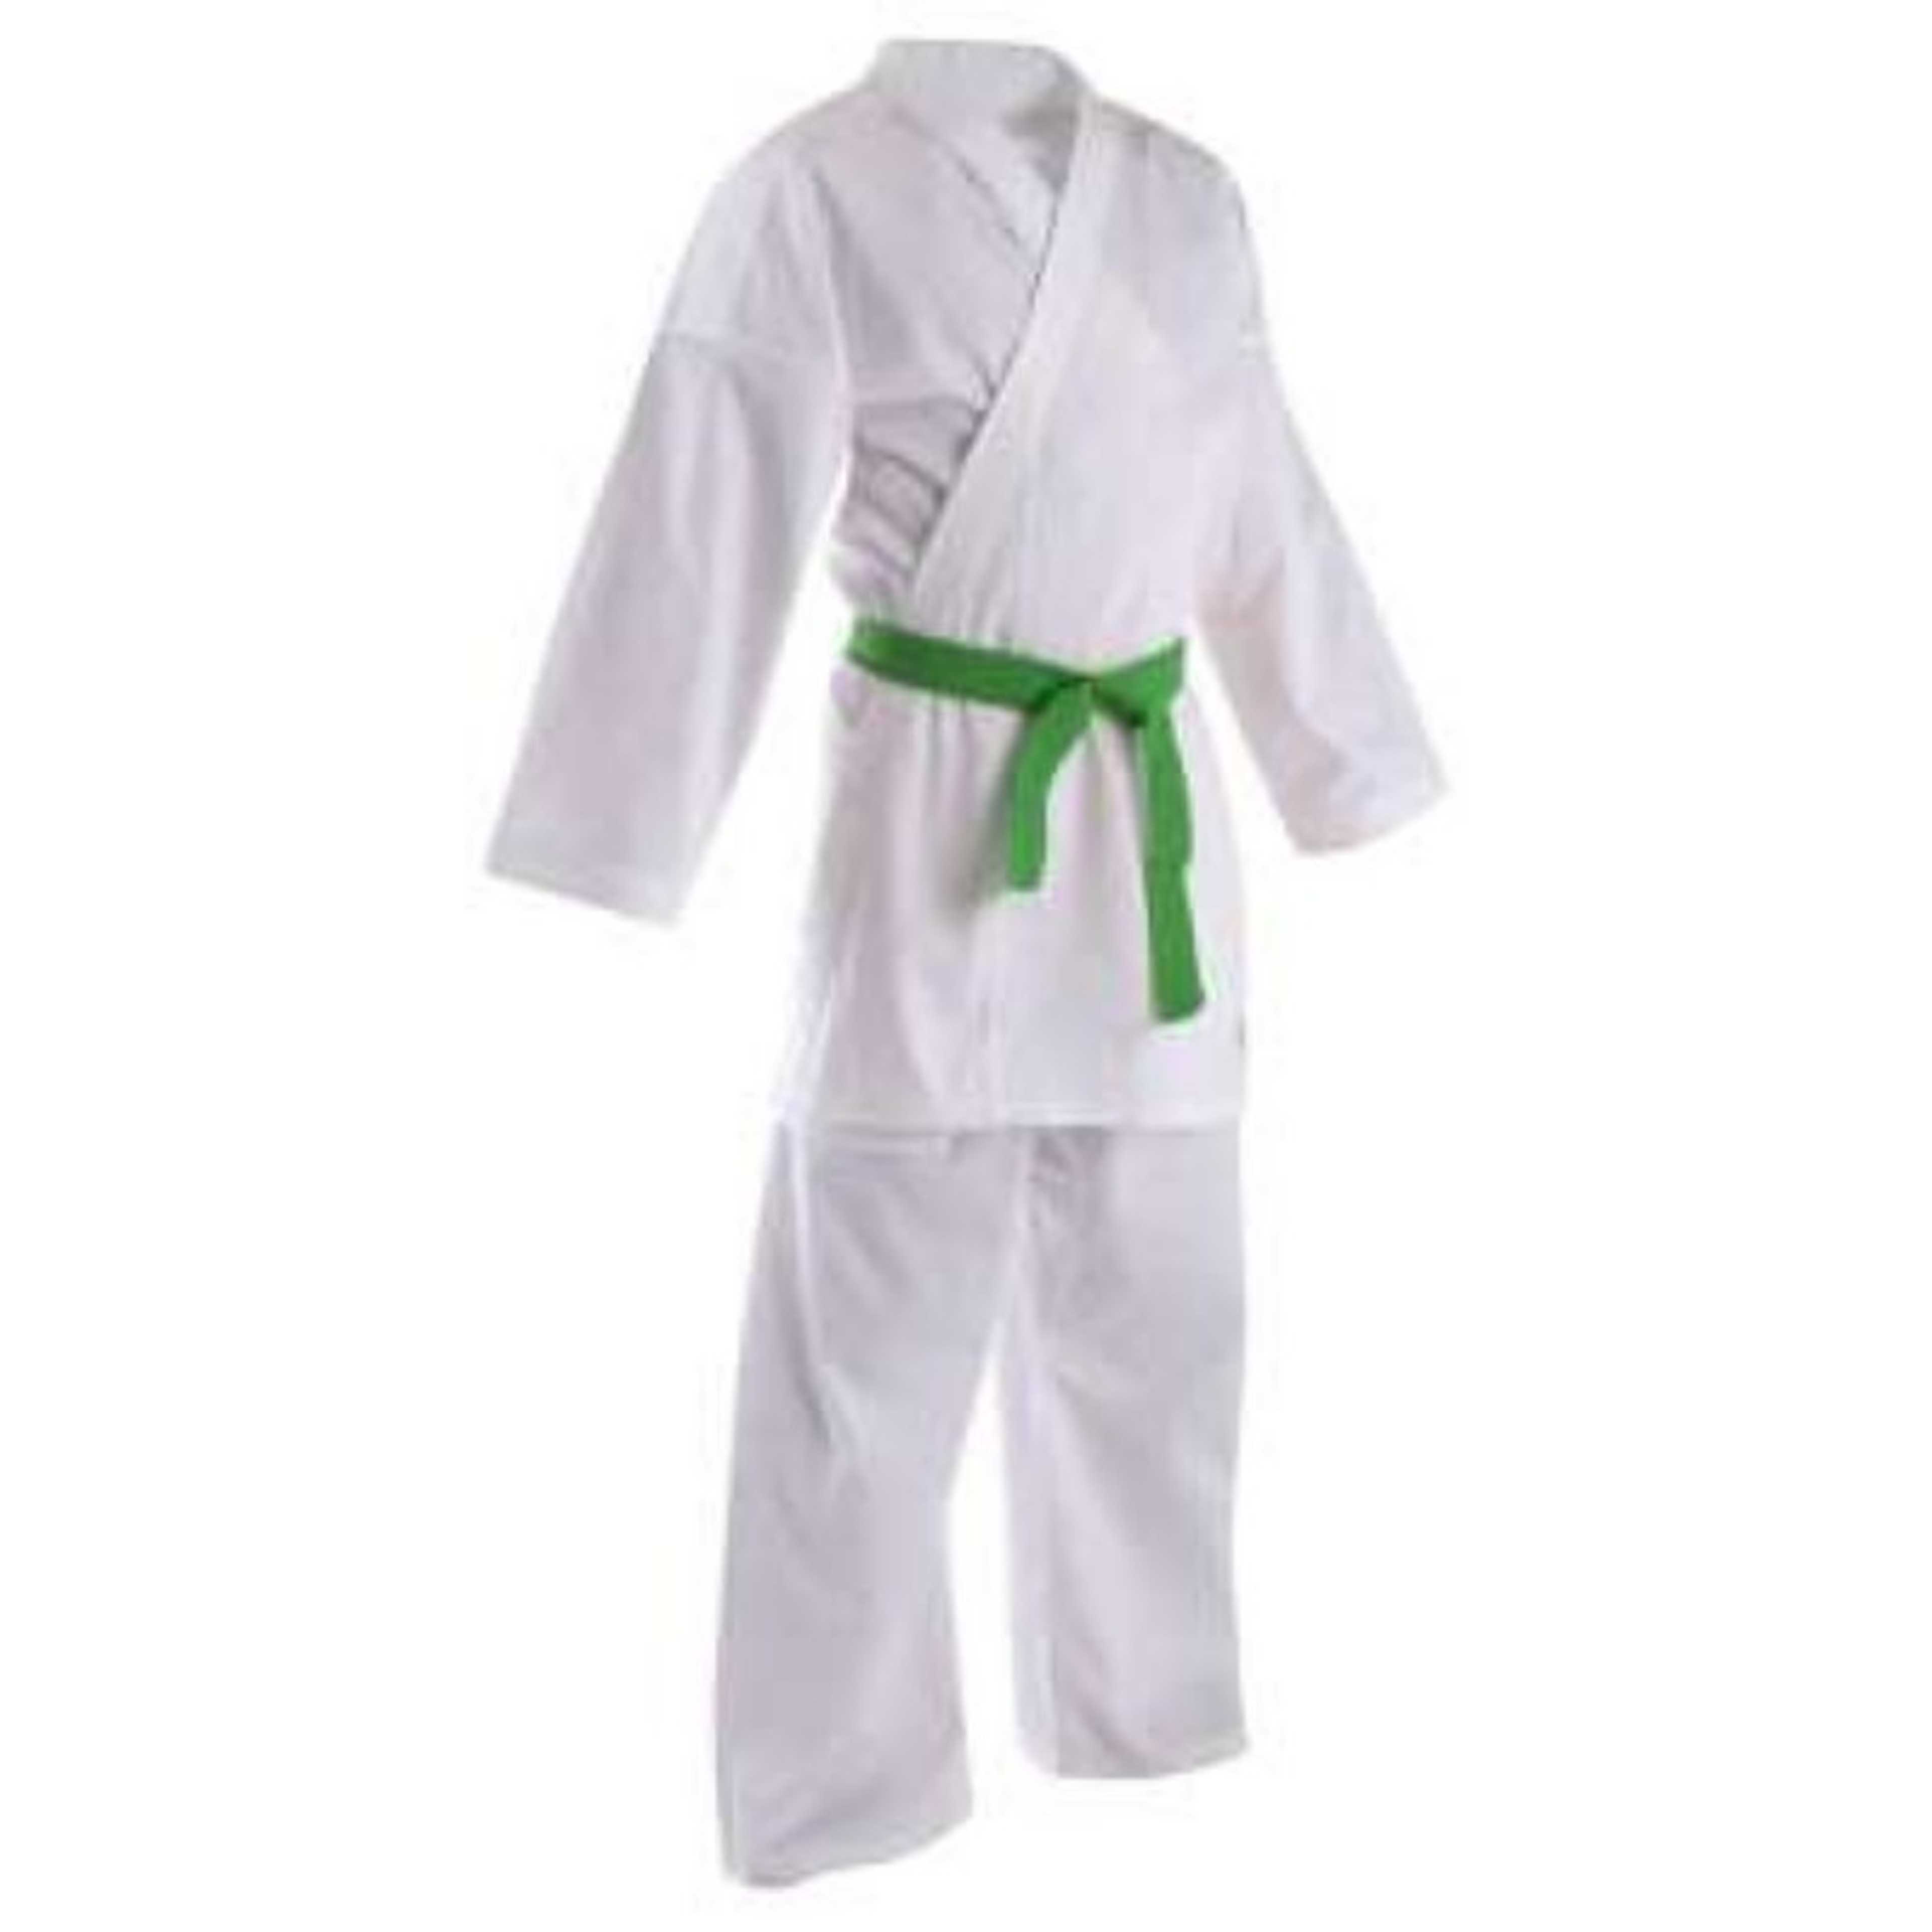 Export Quality Karate Dress Kit No 5 with Green Belt